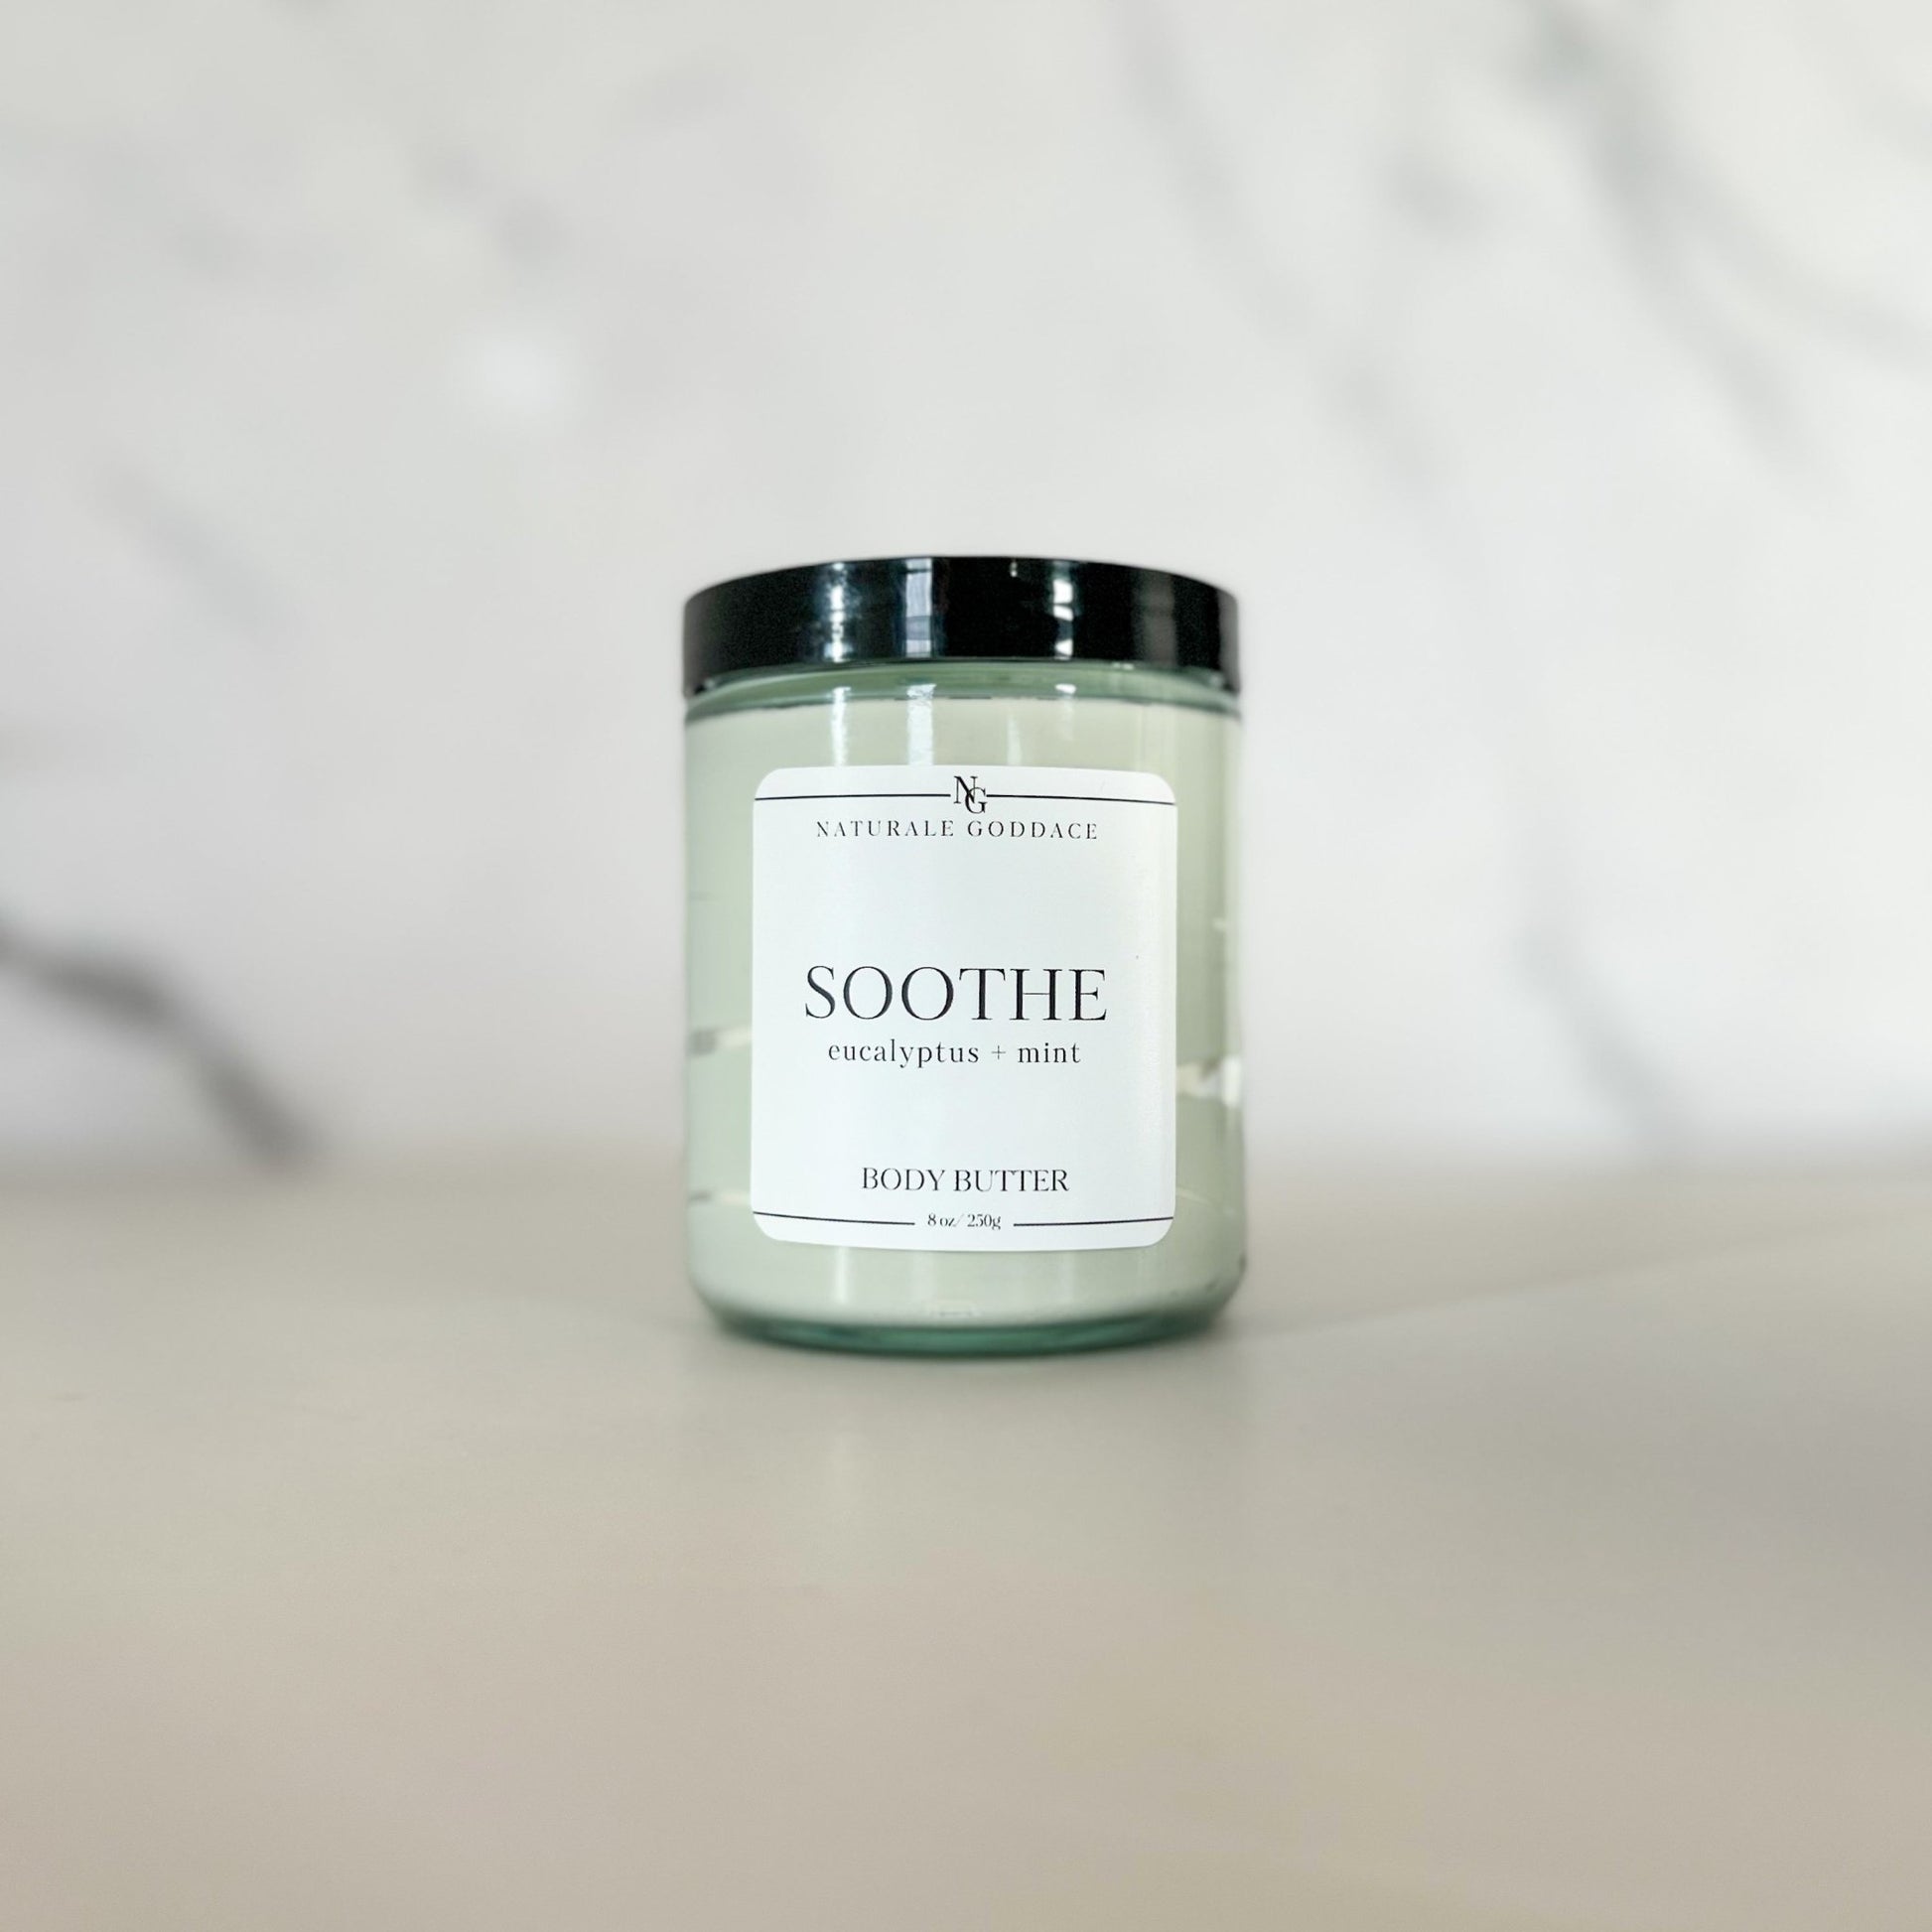 Soothe Body Butter - Naturale Goddace | Clean + simple skincare-Whipped Body Butter